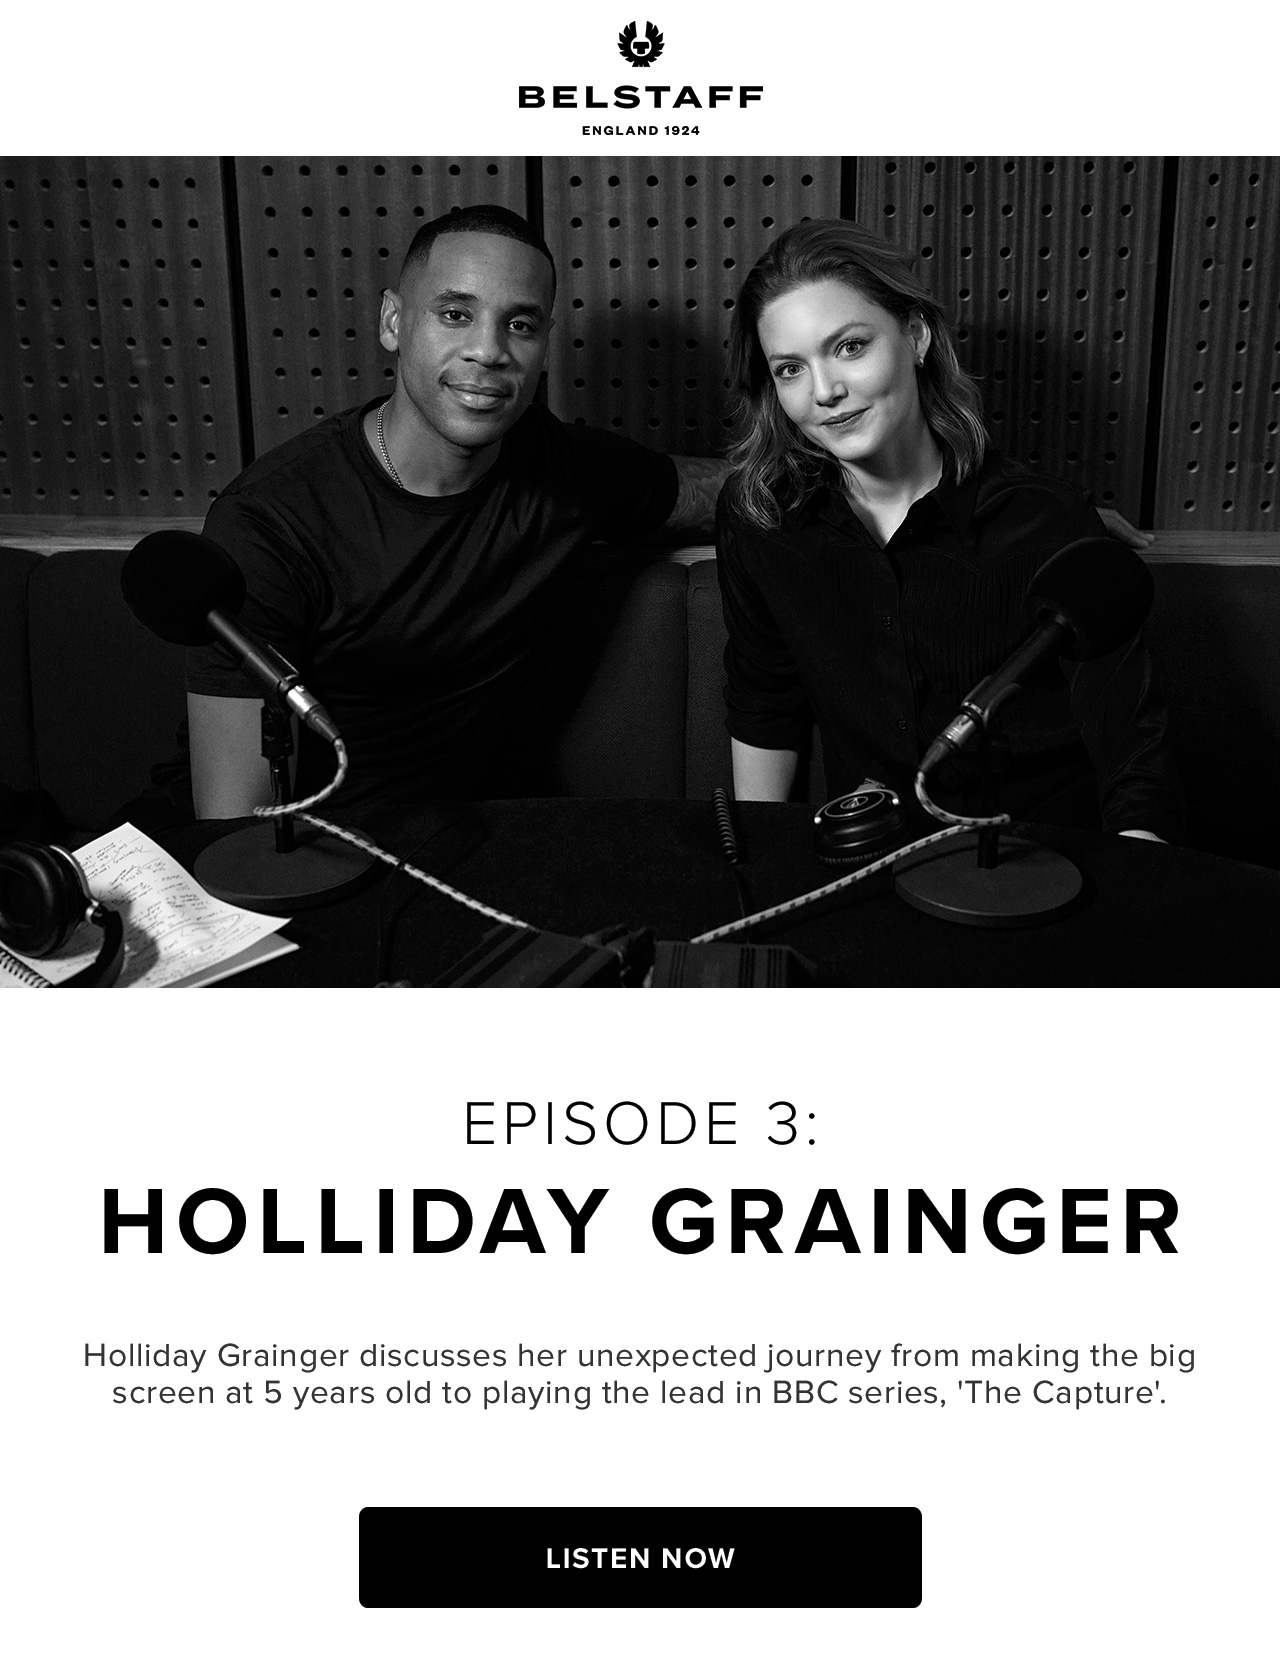 Holliday Grainger discusses her unexpected journey from making the big screen at 5 years old to playing the lead in BBC series, ''The Capture''.